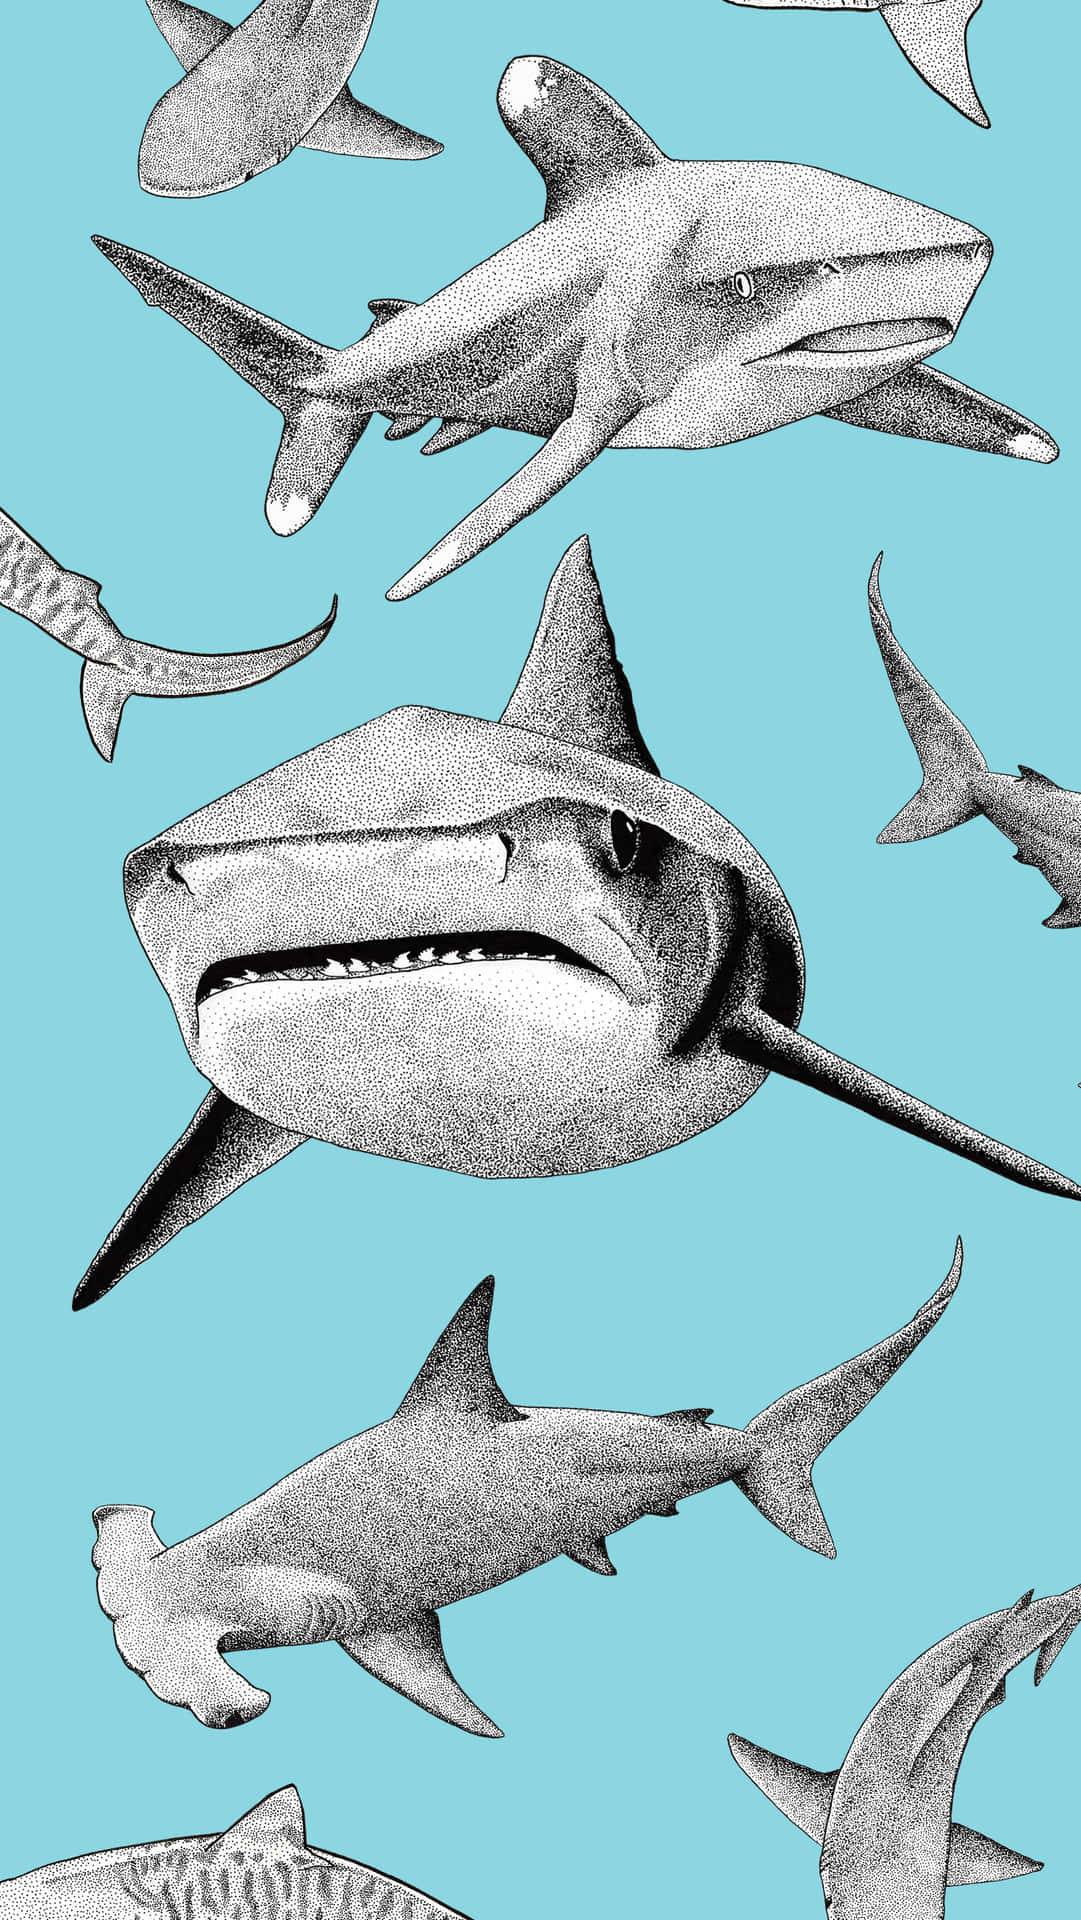 Unlock Your Phone with the Powerful Shark Iphone Wallpaper